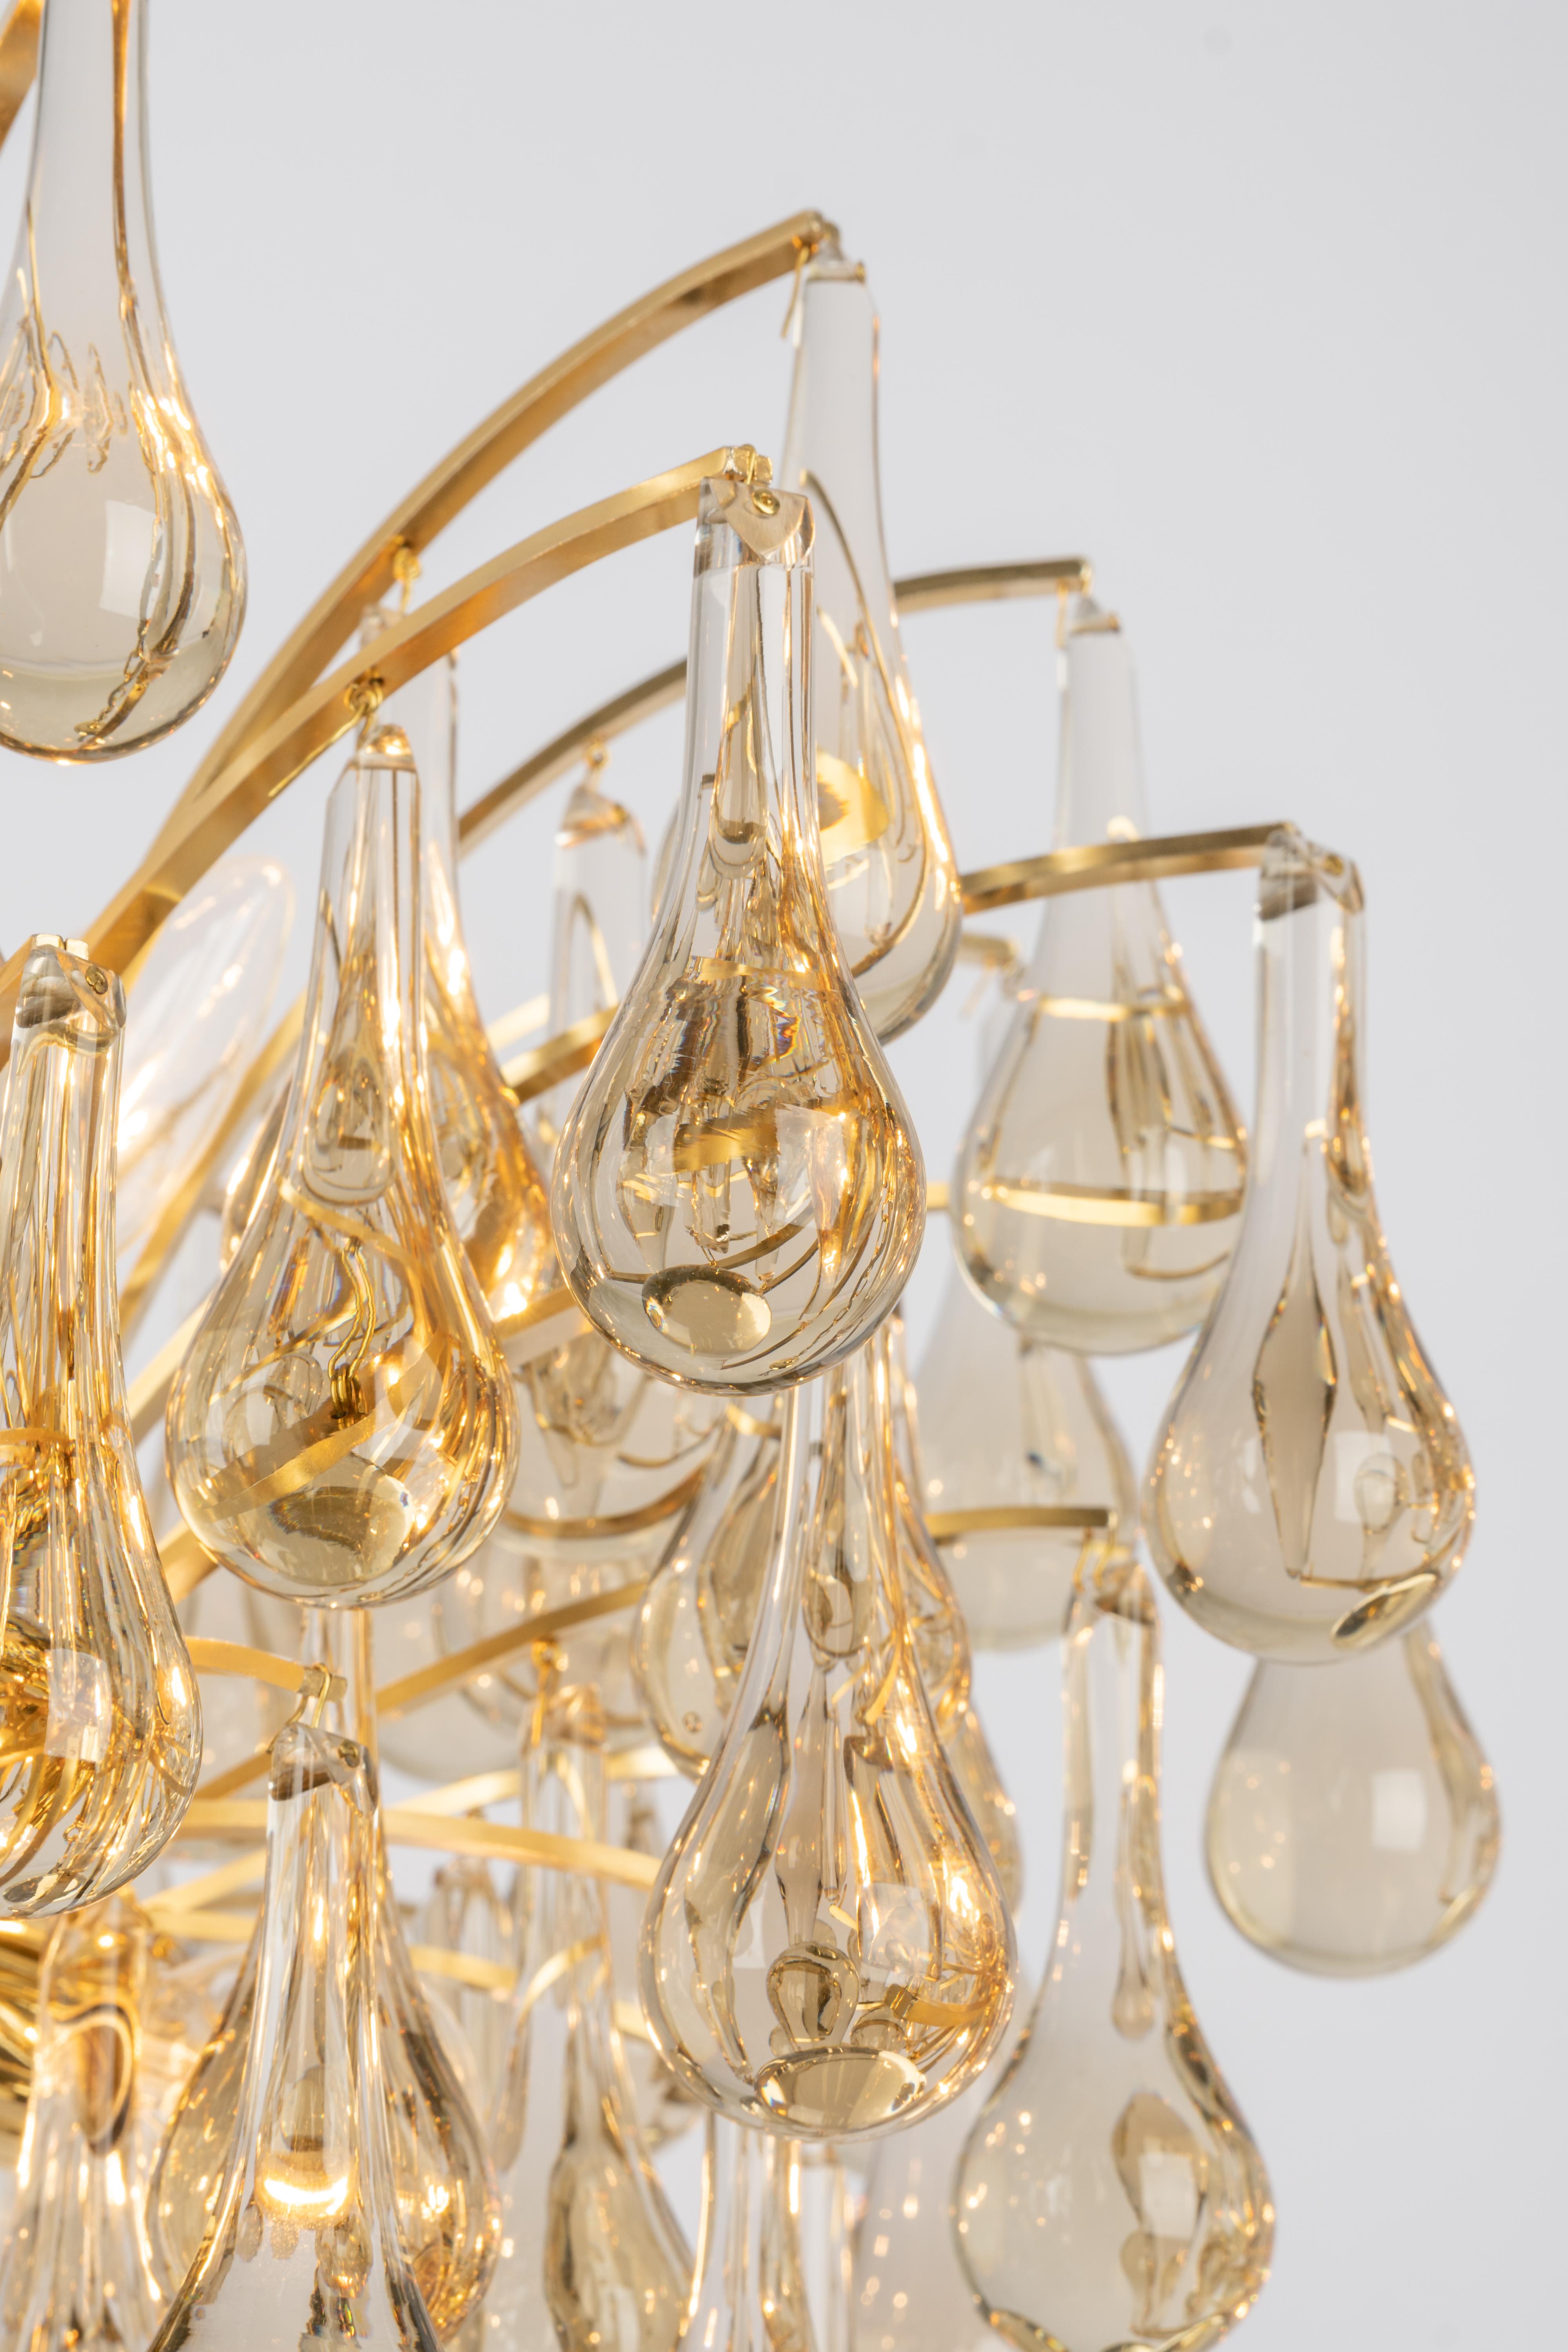 Large Murano Glass Tear Drop Chandelier, Christoph Palme, Germany, 1970s For Sale 2